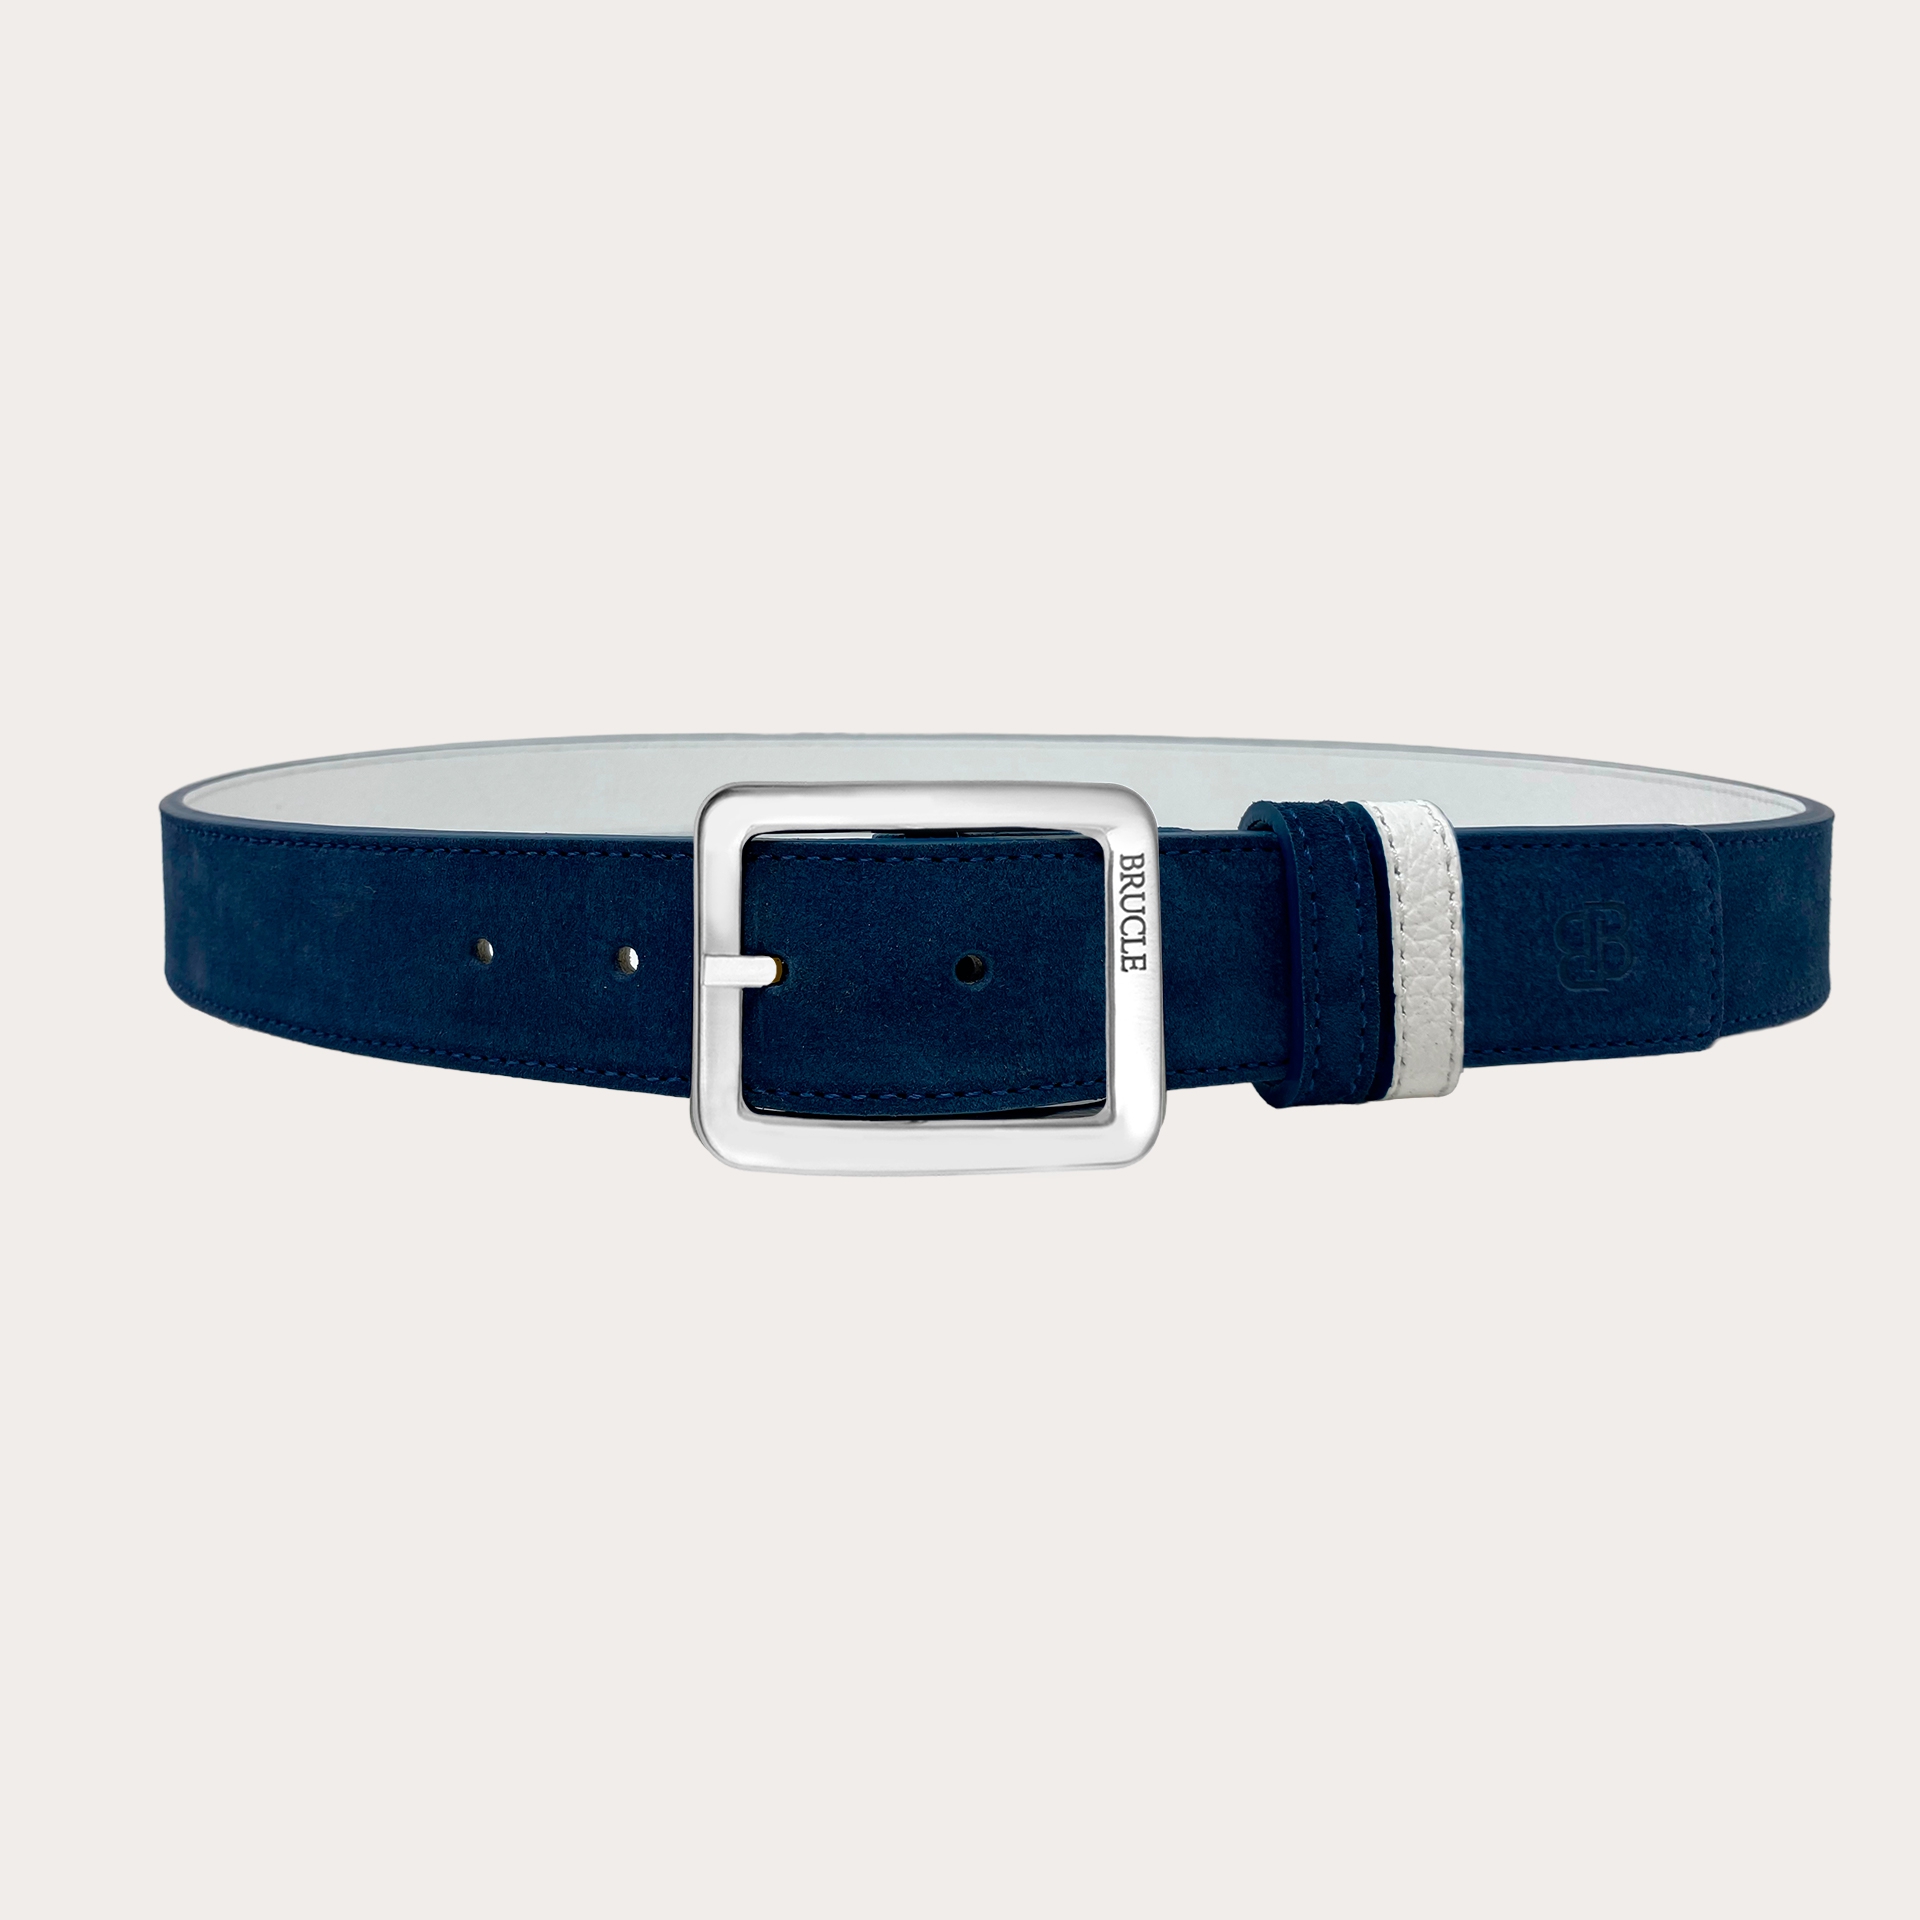 Reversible belt in blue suede and white tumbled leather